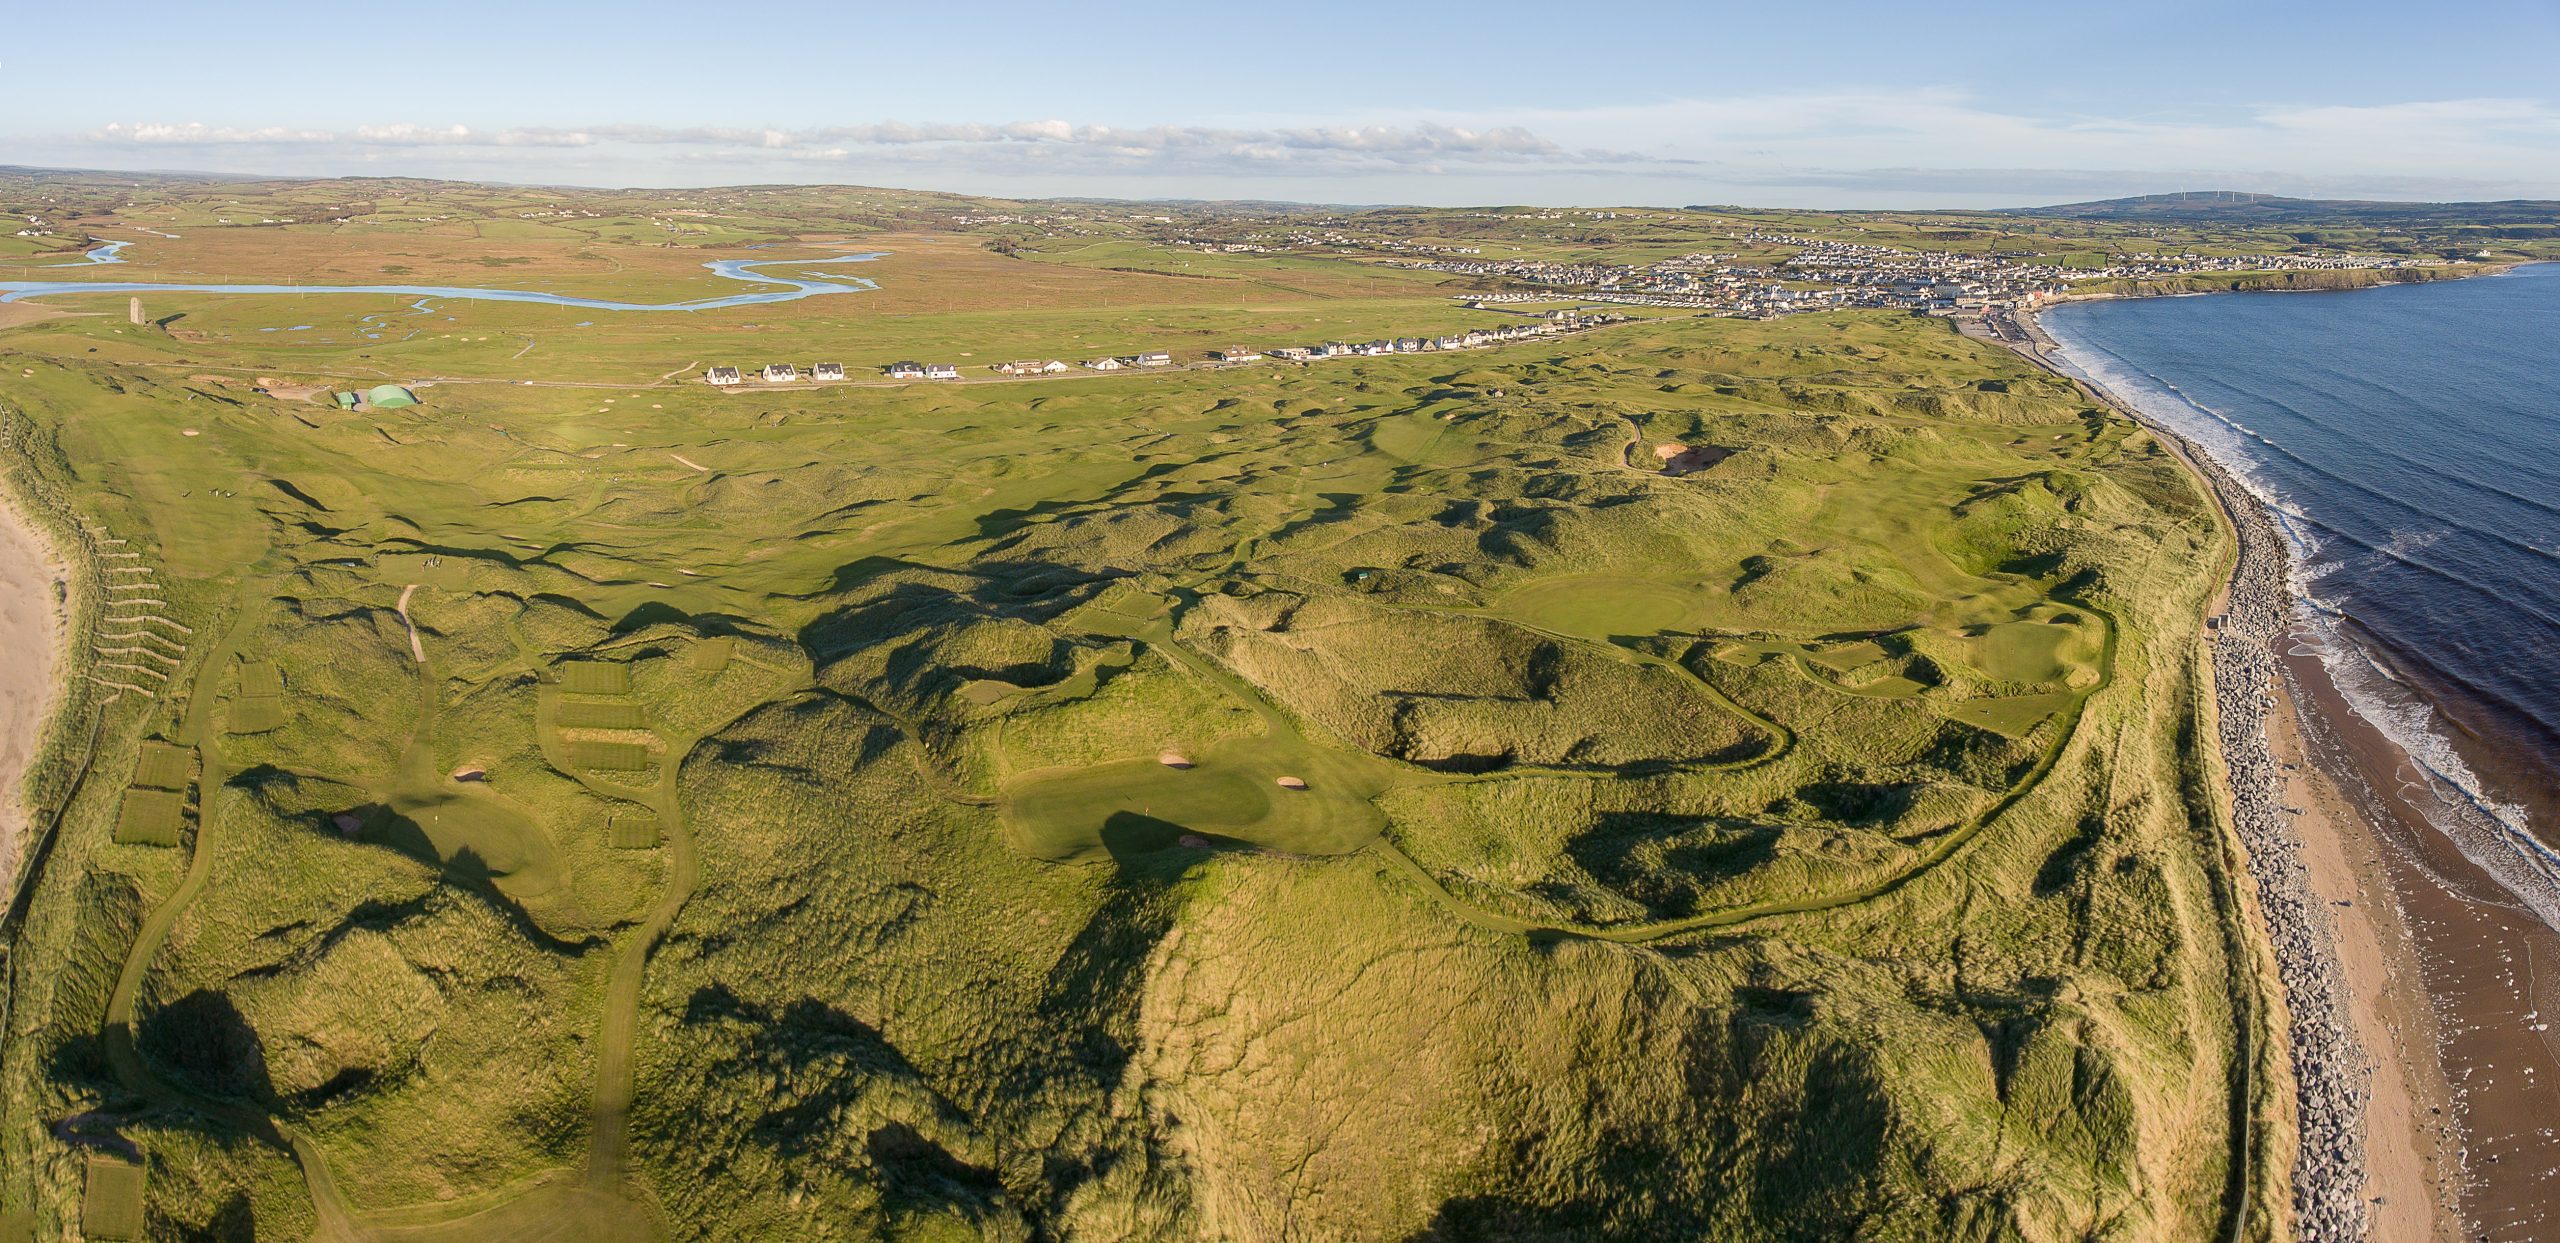 Overhead view of Lahinch links golf course in Ireland.